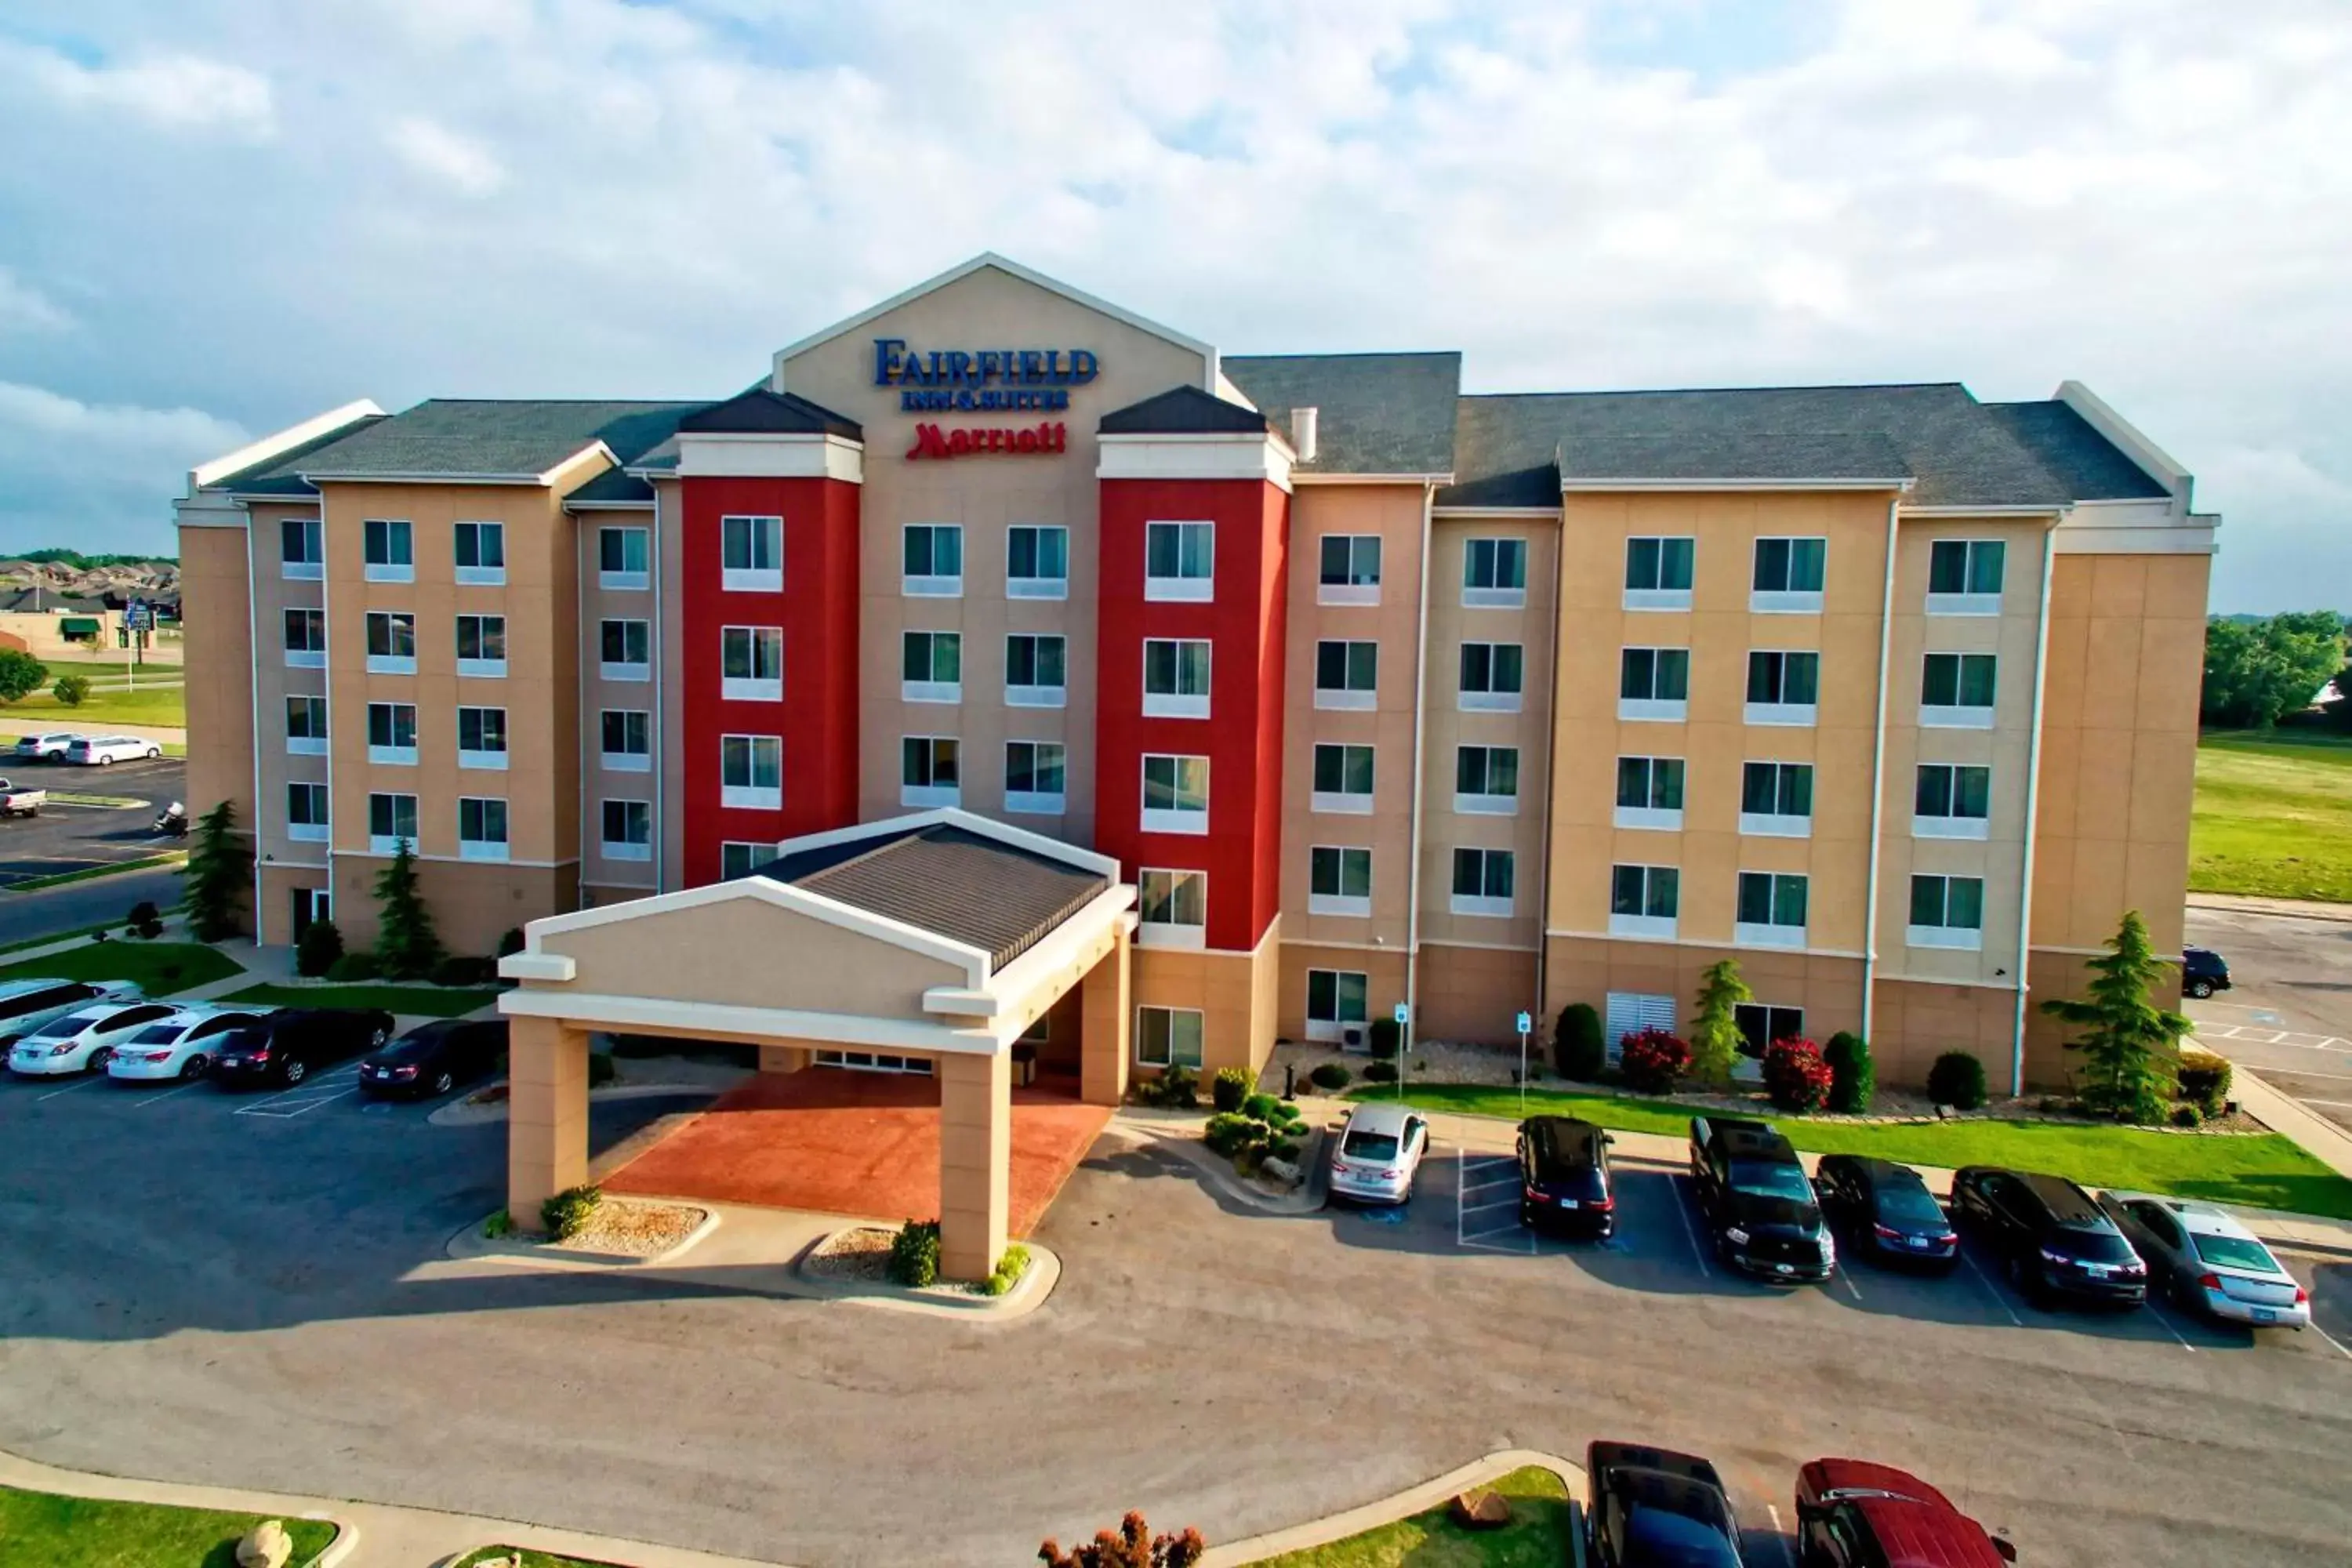 Property Building in Fairfield Inn and Suites by Marriott Weatherford